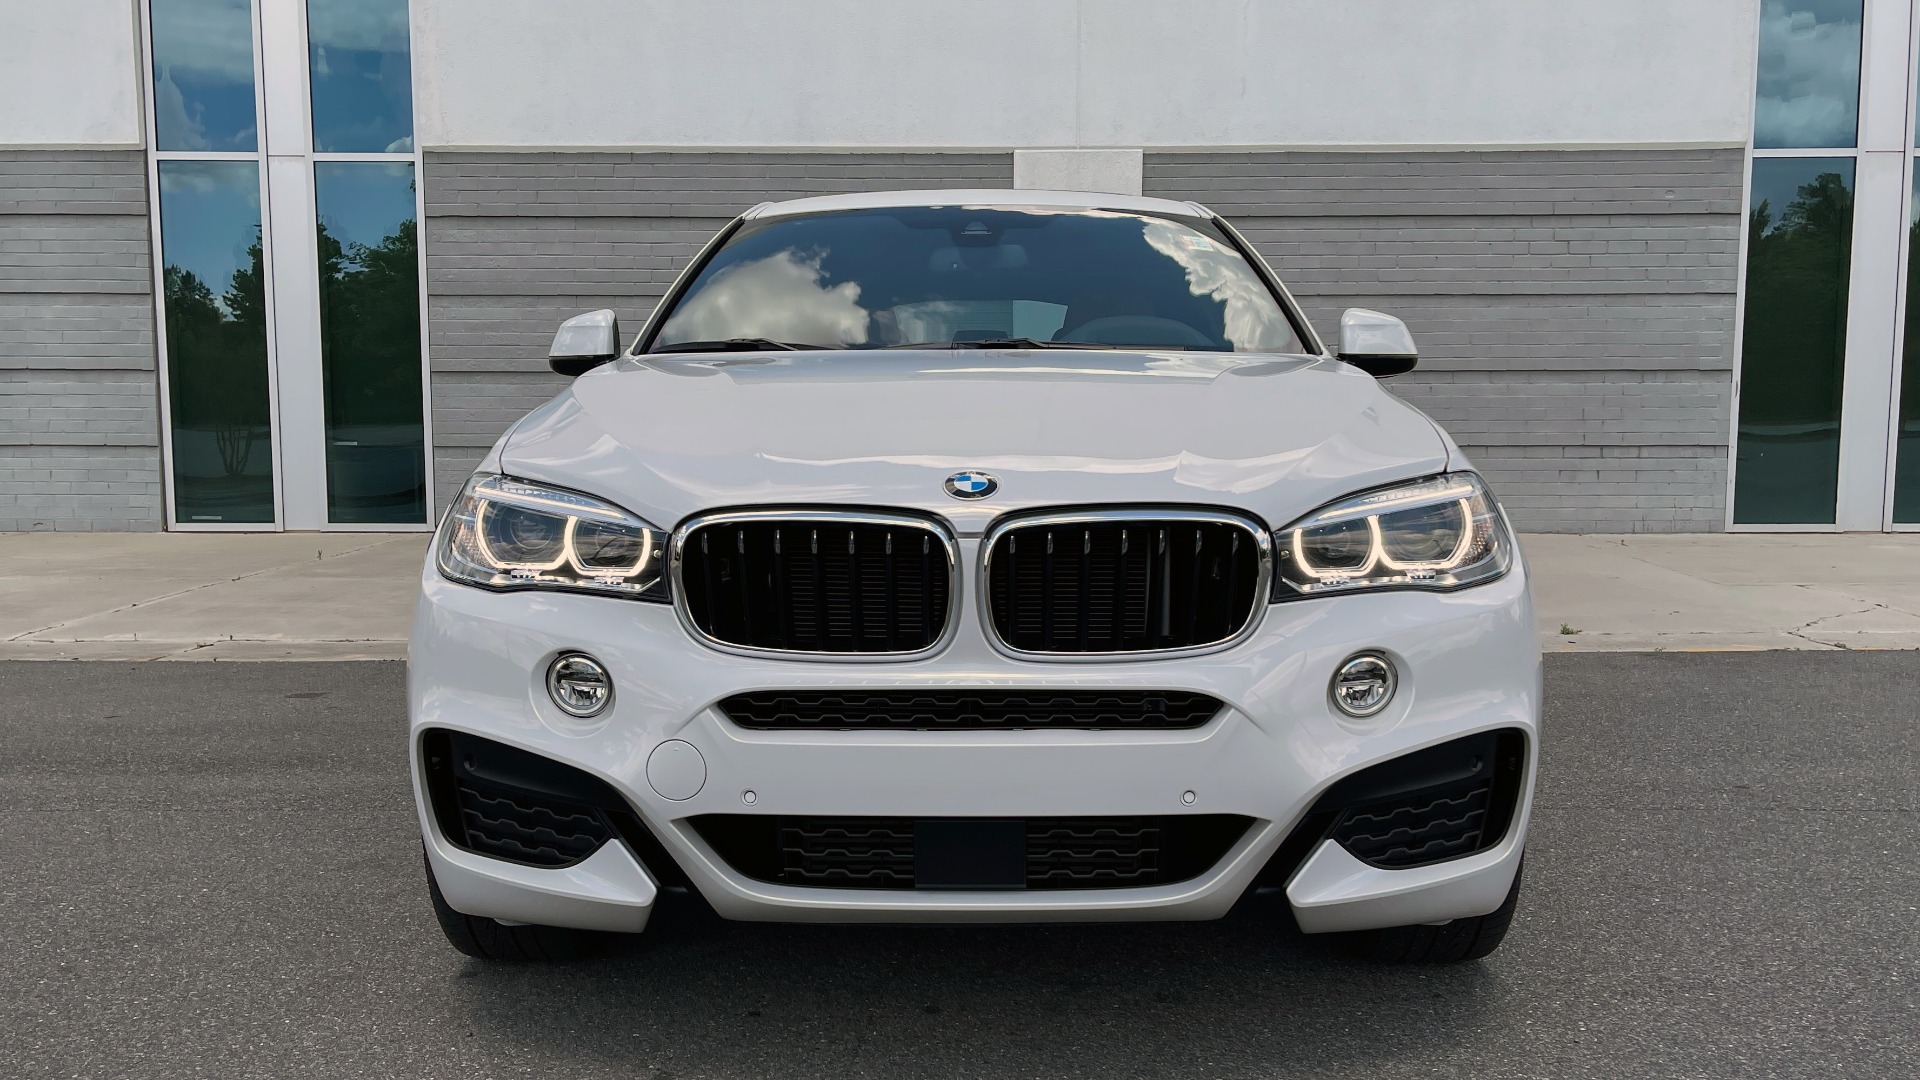 Used 2018 BMW X6 XDRIVE35I M-SPORT / NAV / DRVR ASST PLUS / ADAPT M-SUSP / REARVIEW for sale Sold at Formula Imports in Charlotte NC 28227 12